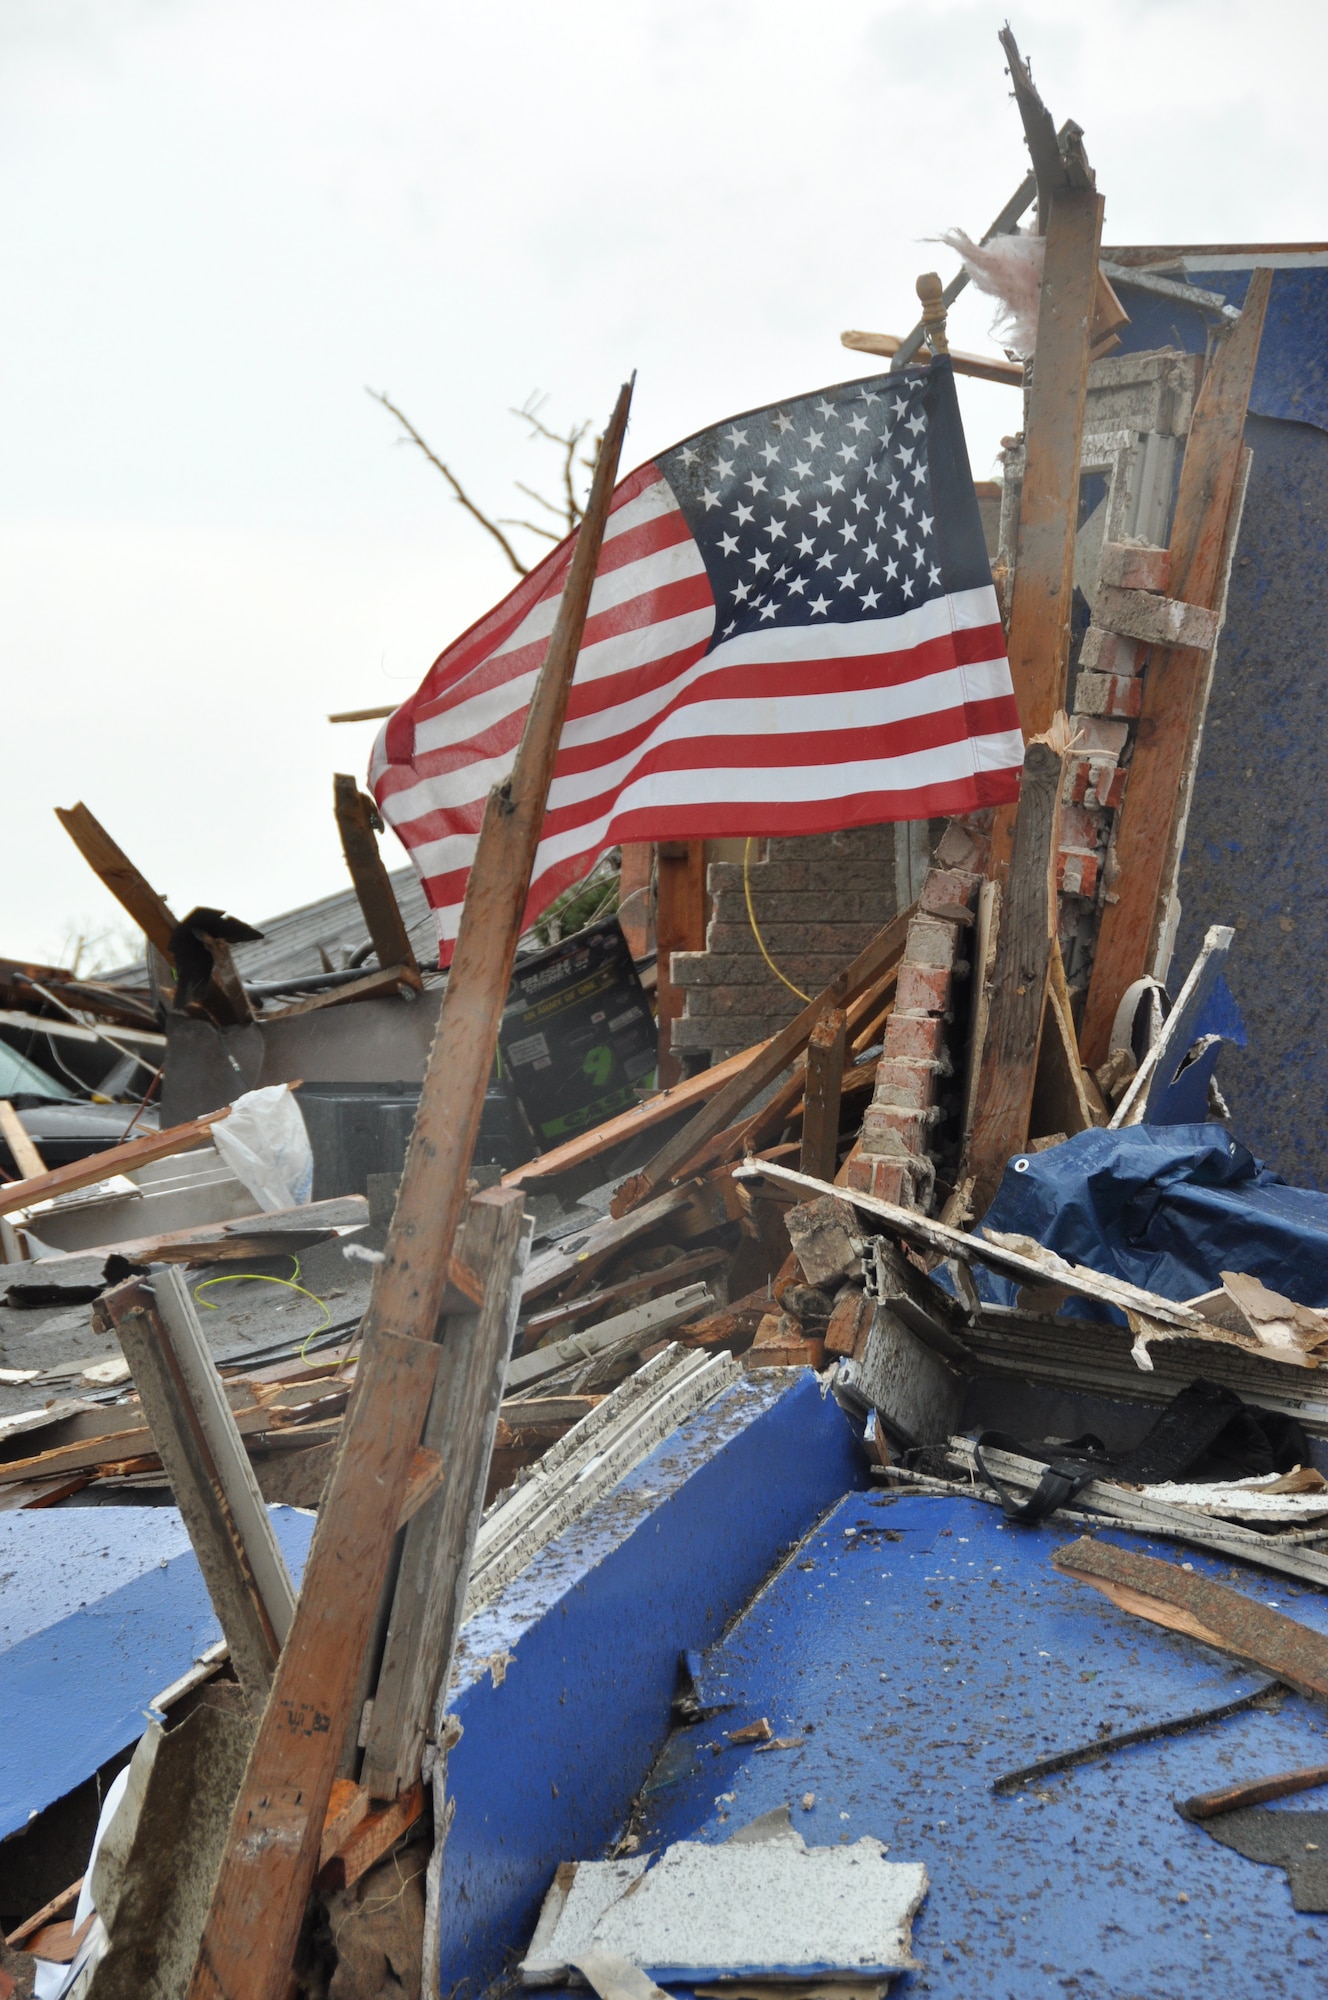 A United States flag flies from the ruble of a home destroyed in Moore, Okla. A powerful EF-5 tornado touched down approximately three miles south of Tinker AFB. (U.S. Air Force photo by Maj. Jon Quinlan)